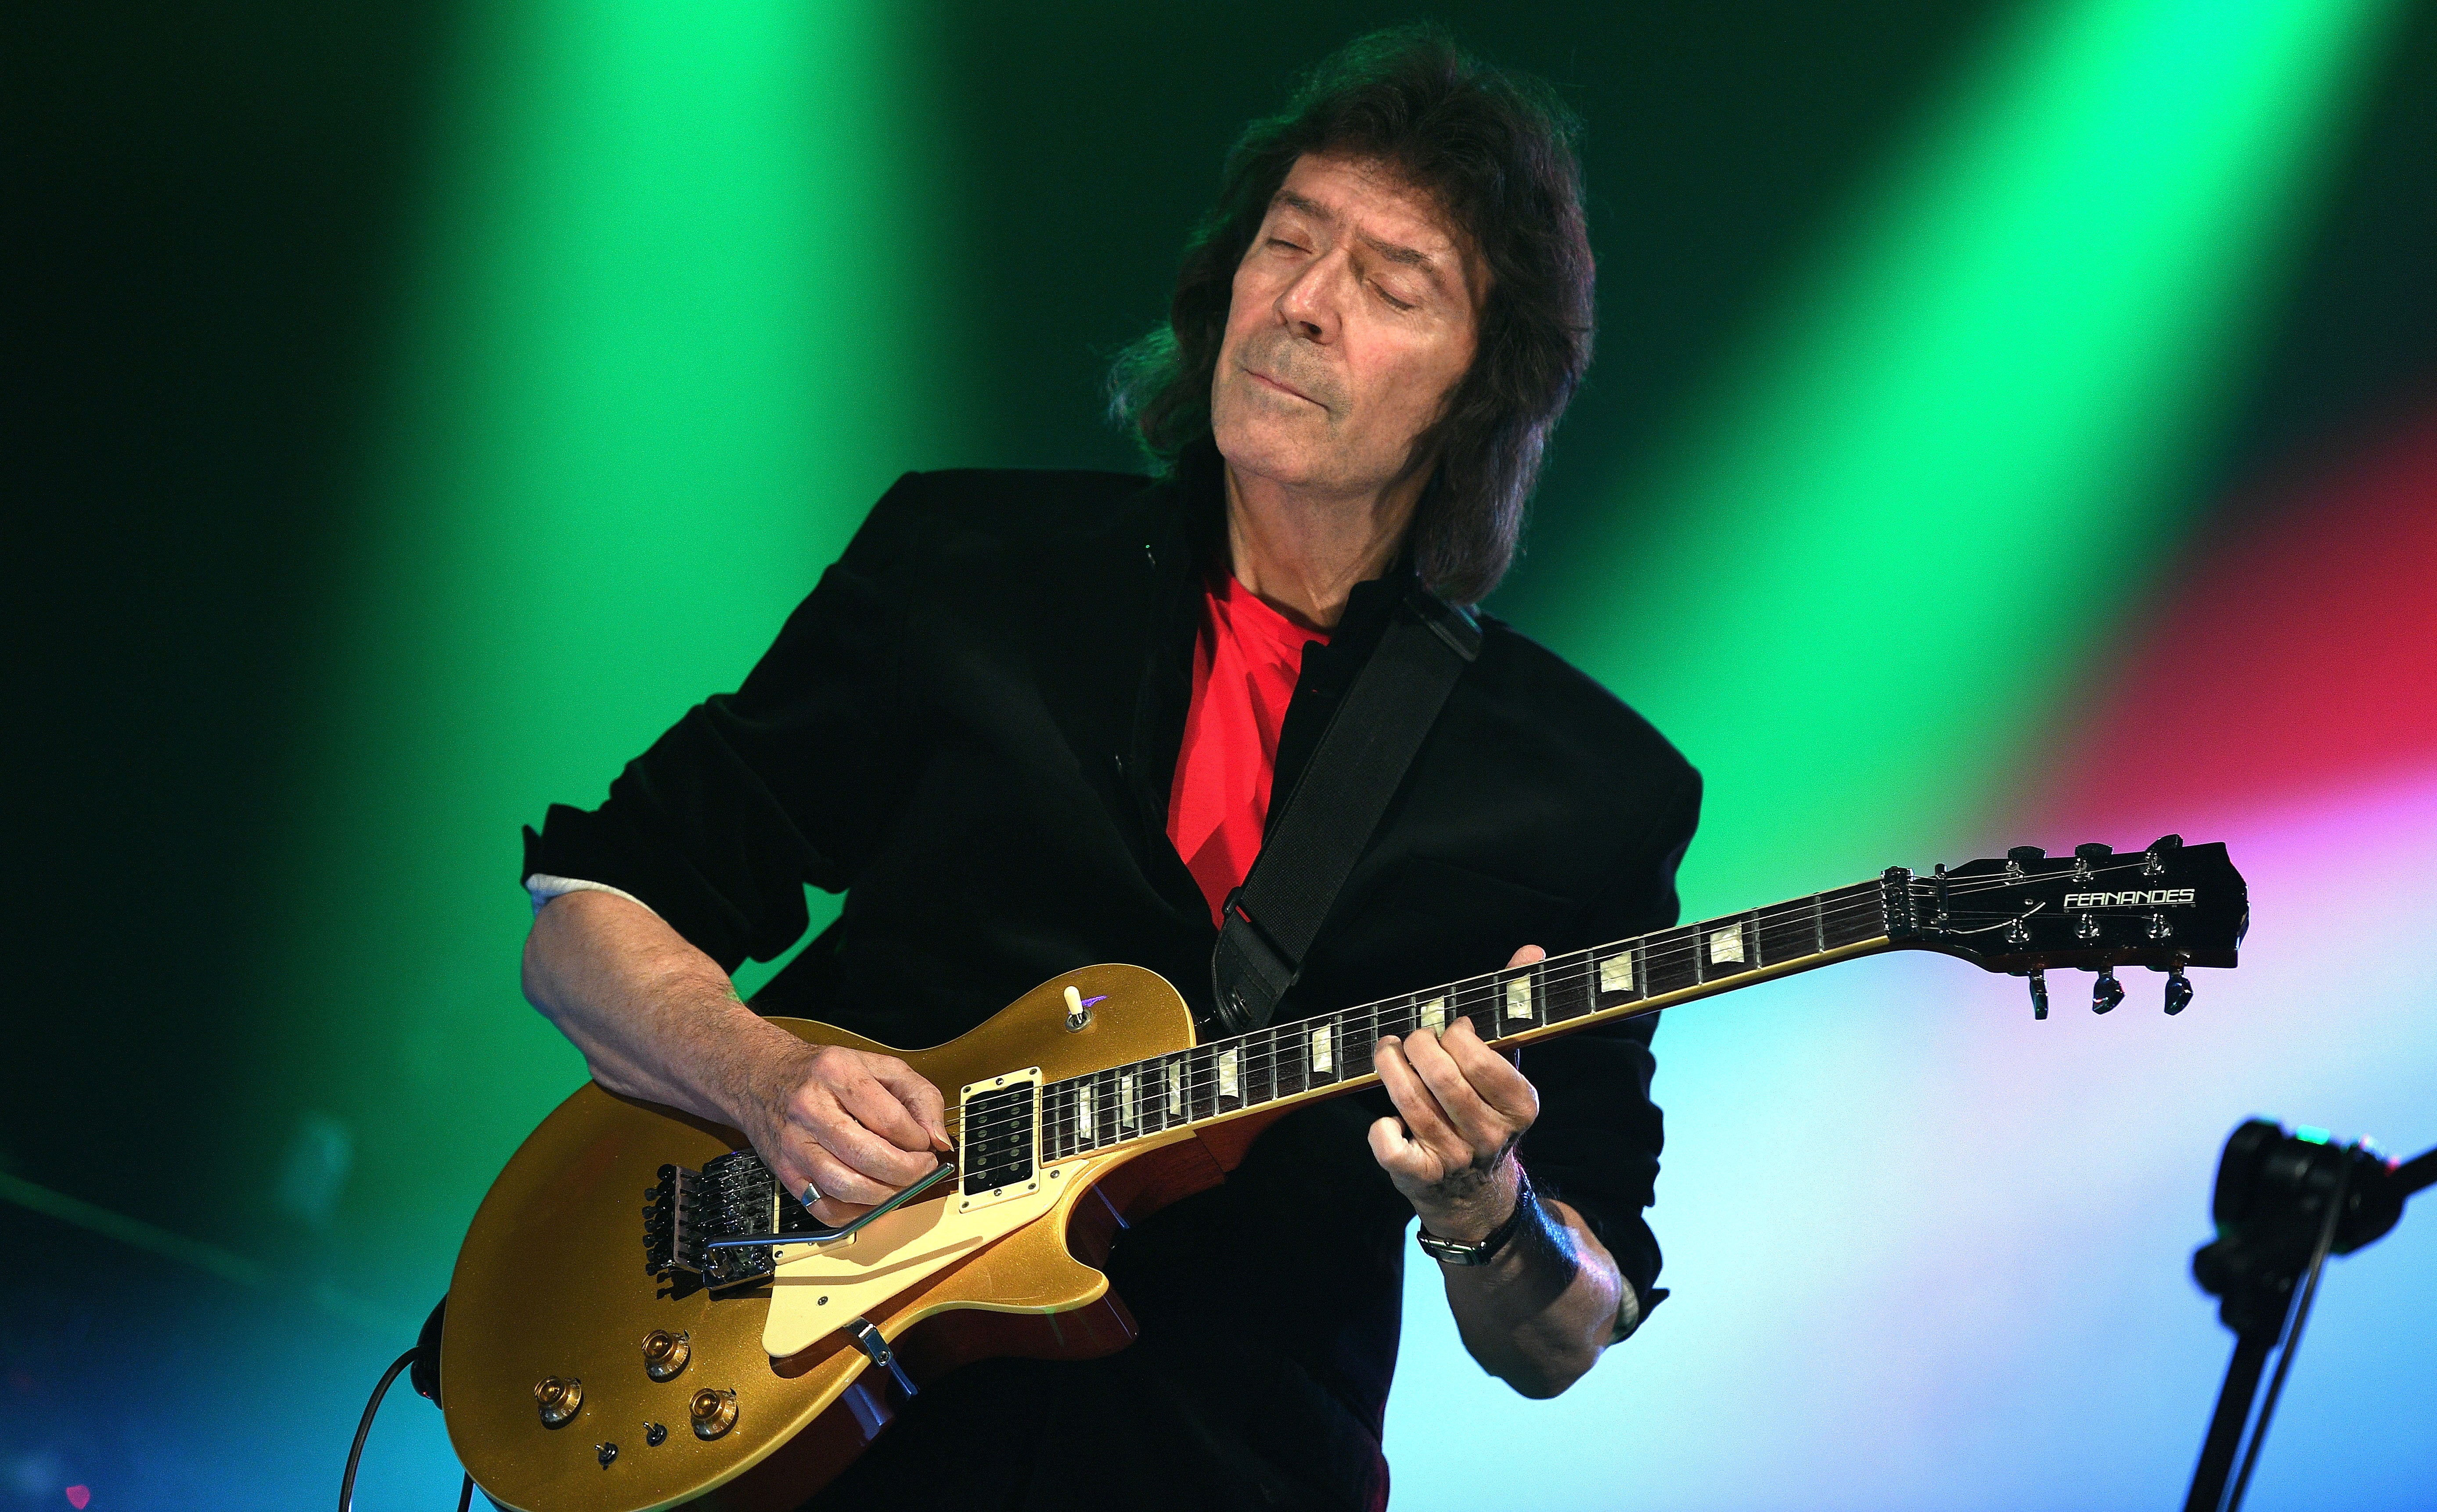 Steve Hackett - Genesis Revisited, Foxtrot at 50, & Hackett Highlights free presale code for show tickets in Toronto, ON (Massey Hall)